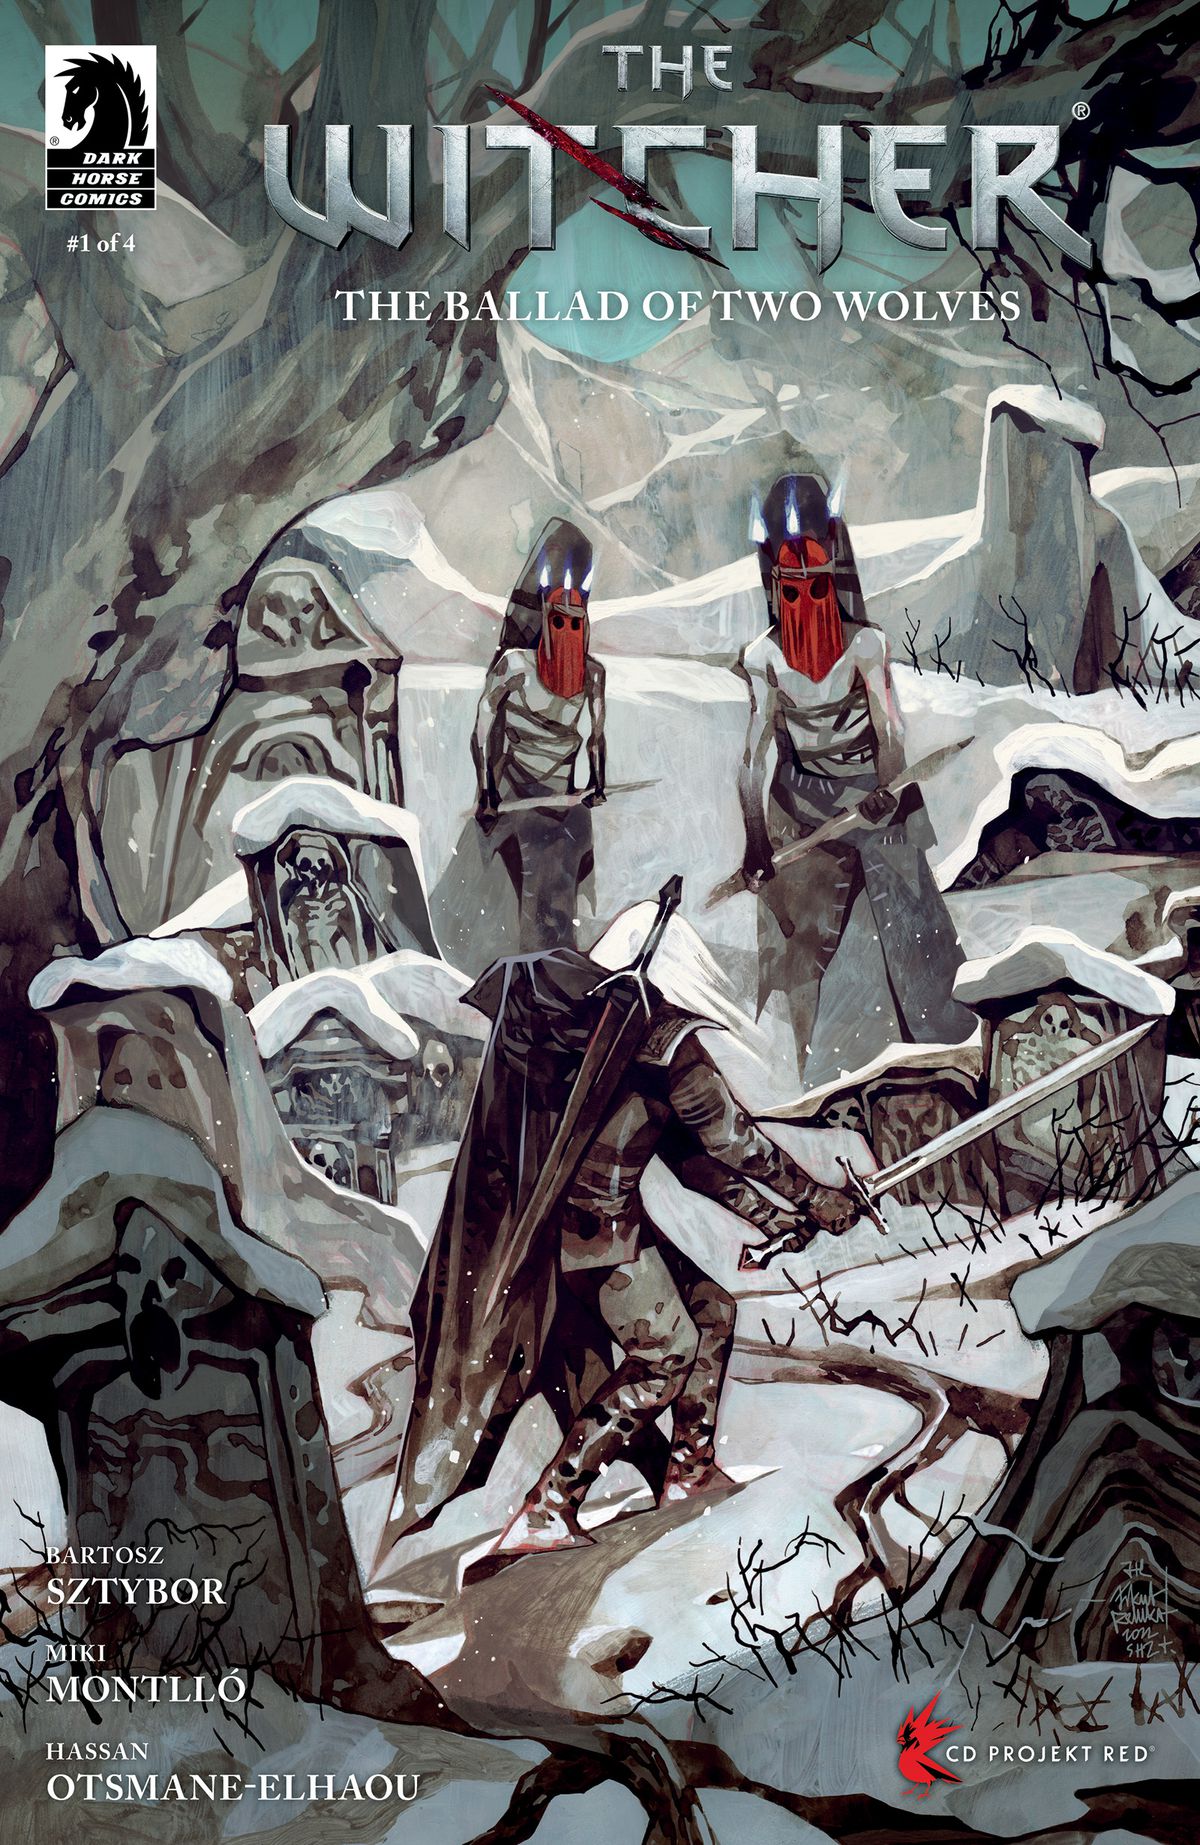 Geralt stands in a cemetery and faces off against two red-hooded enemies on the cover of The Witcher: The Ballad of Two Wolves #1. 